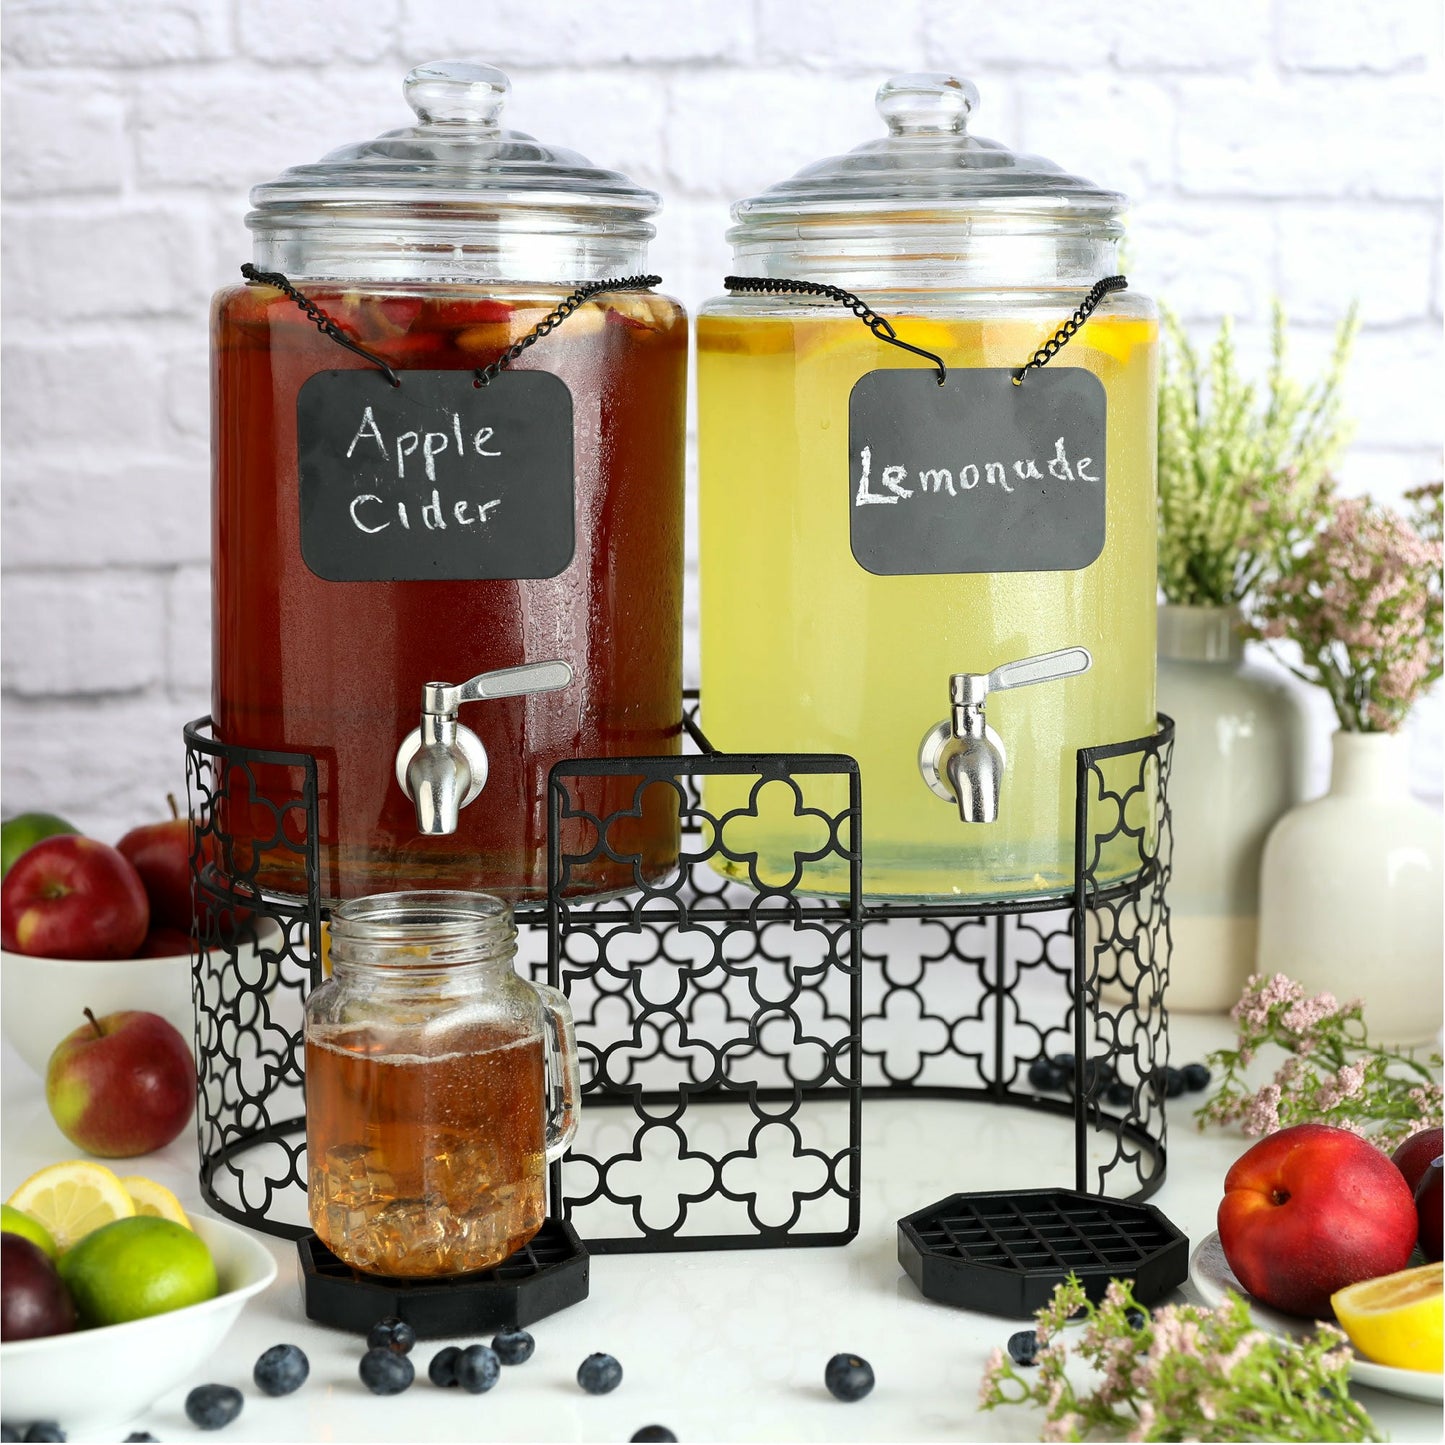 Dual 1.5 Gallon Glass Beverage Dispensers with Decorative Metal Stand